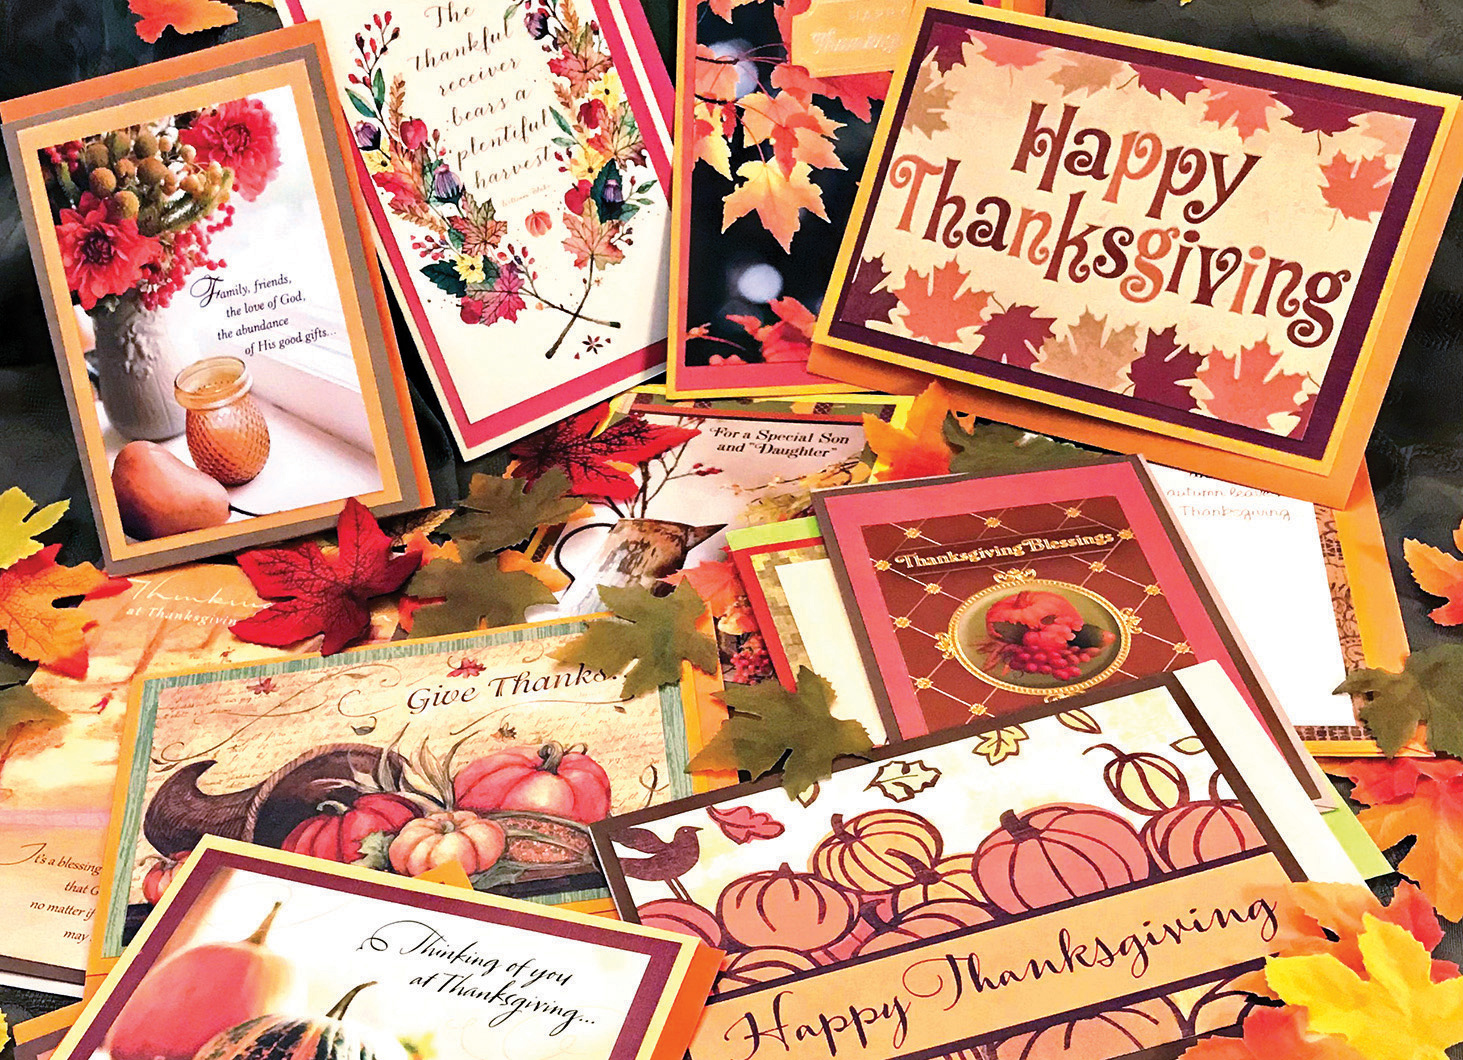 Thanksgiving cards can be delivered to you.